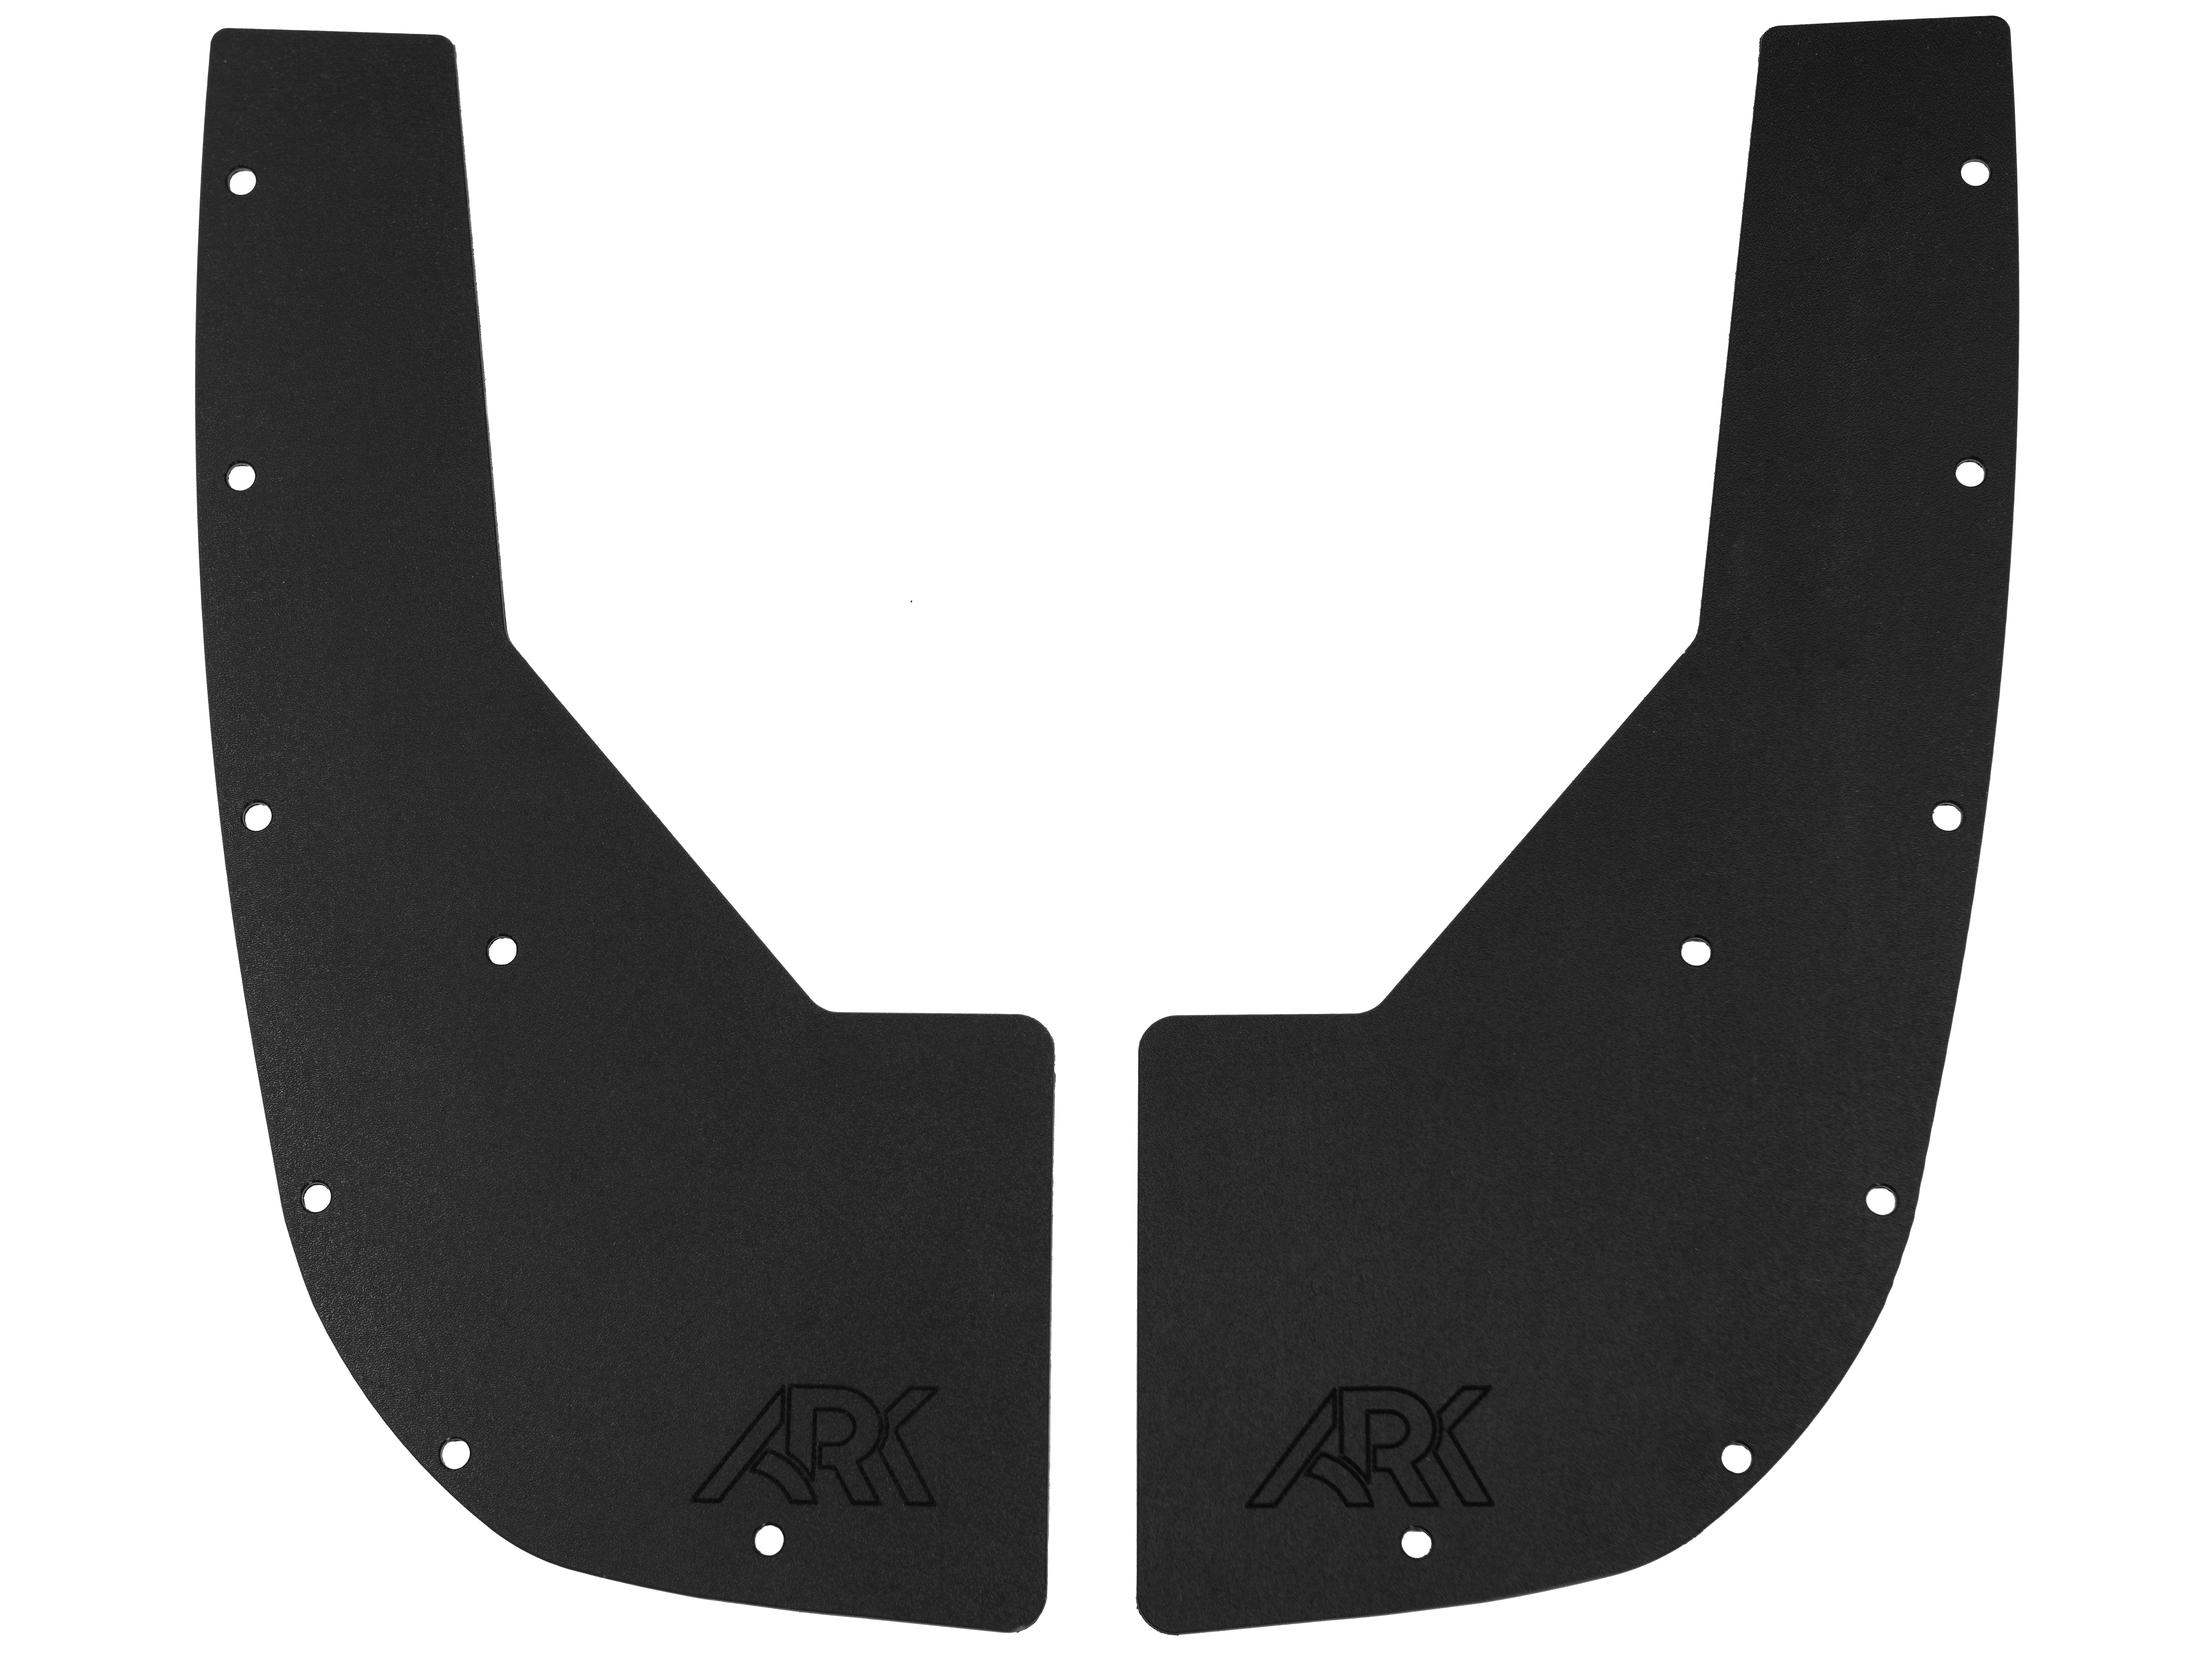 2006-2009 Toyota 4Runner Mud Flap Deletes and Gap Fillers